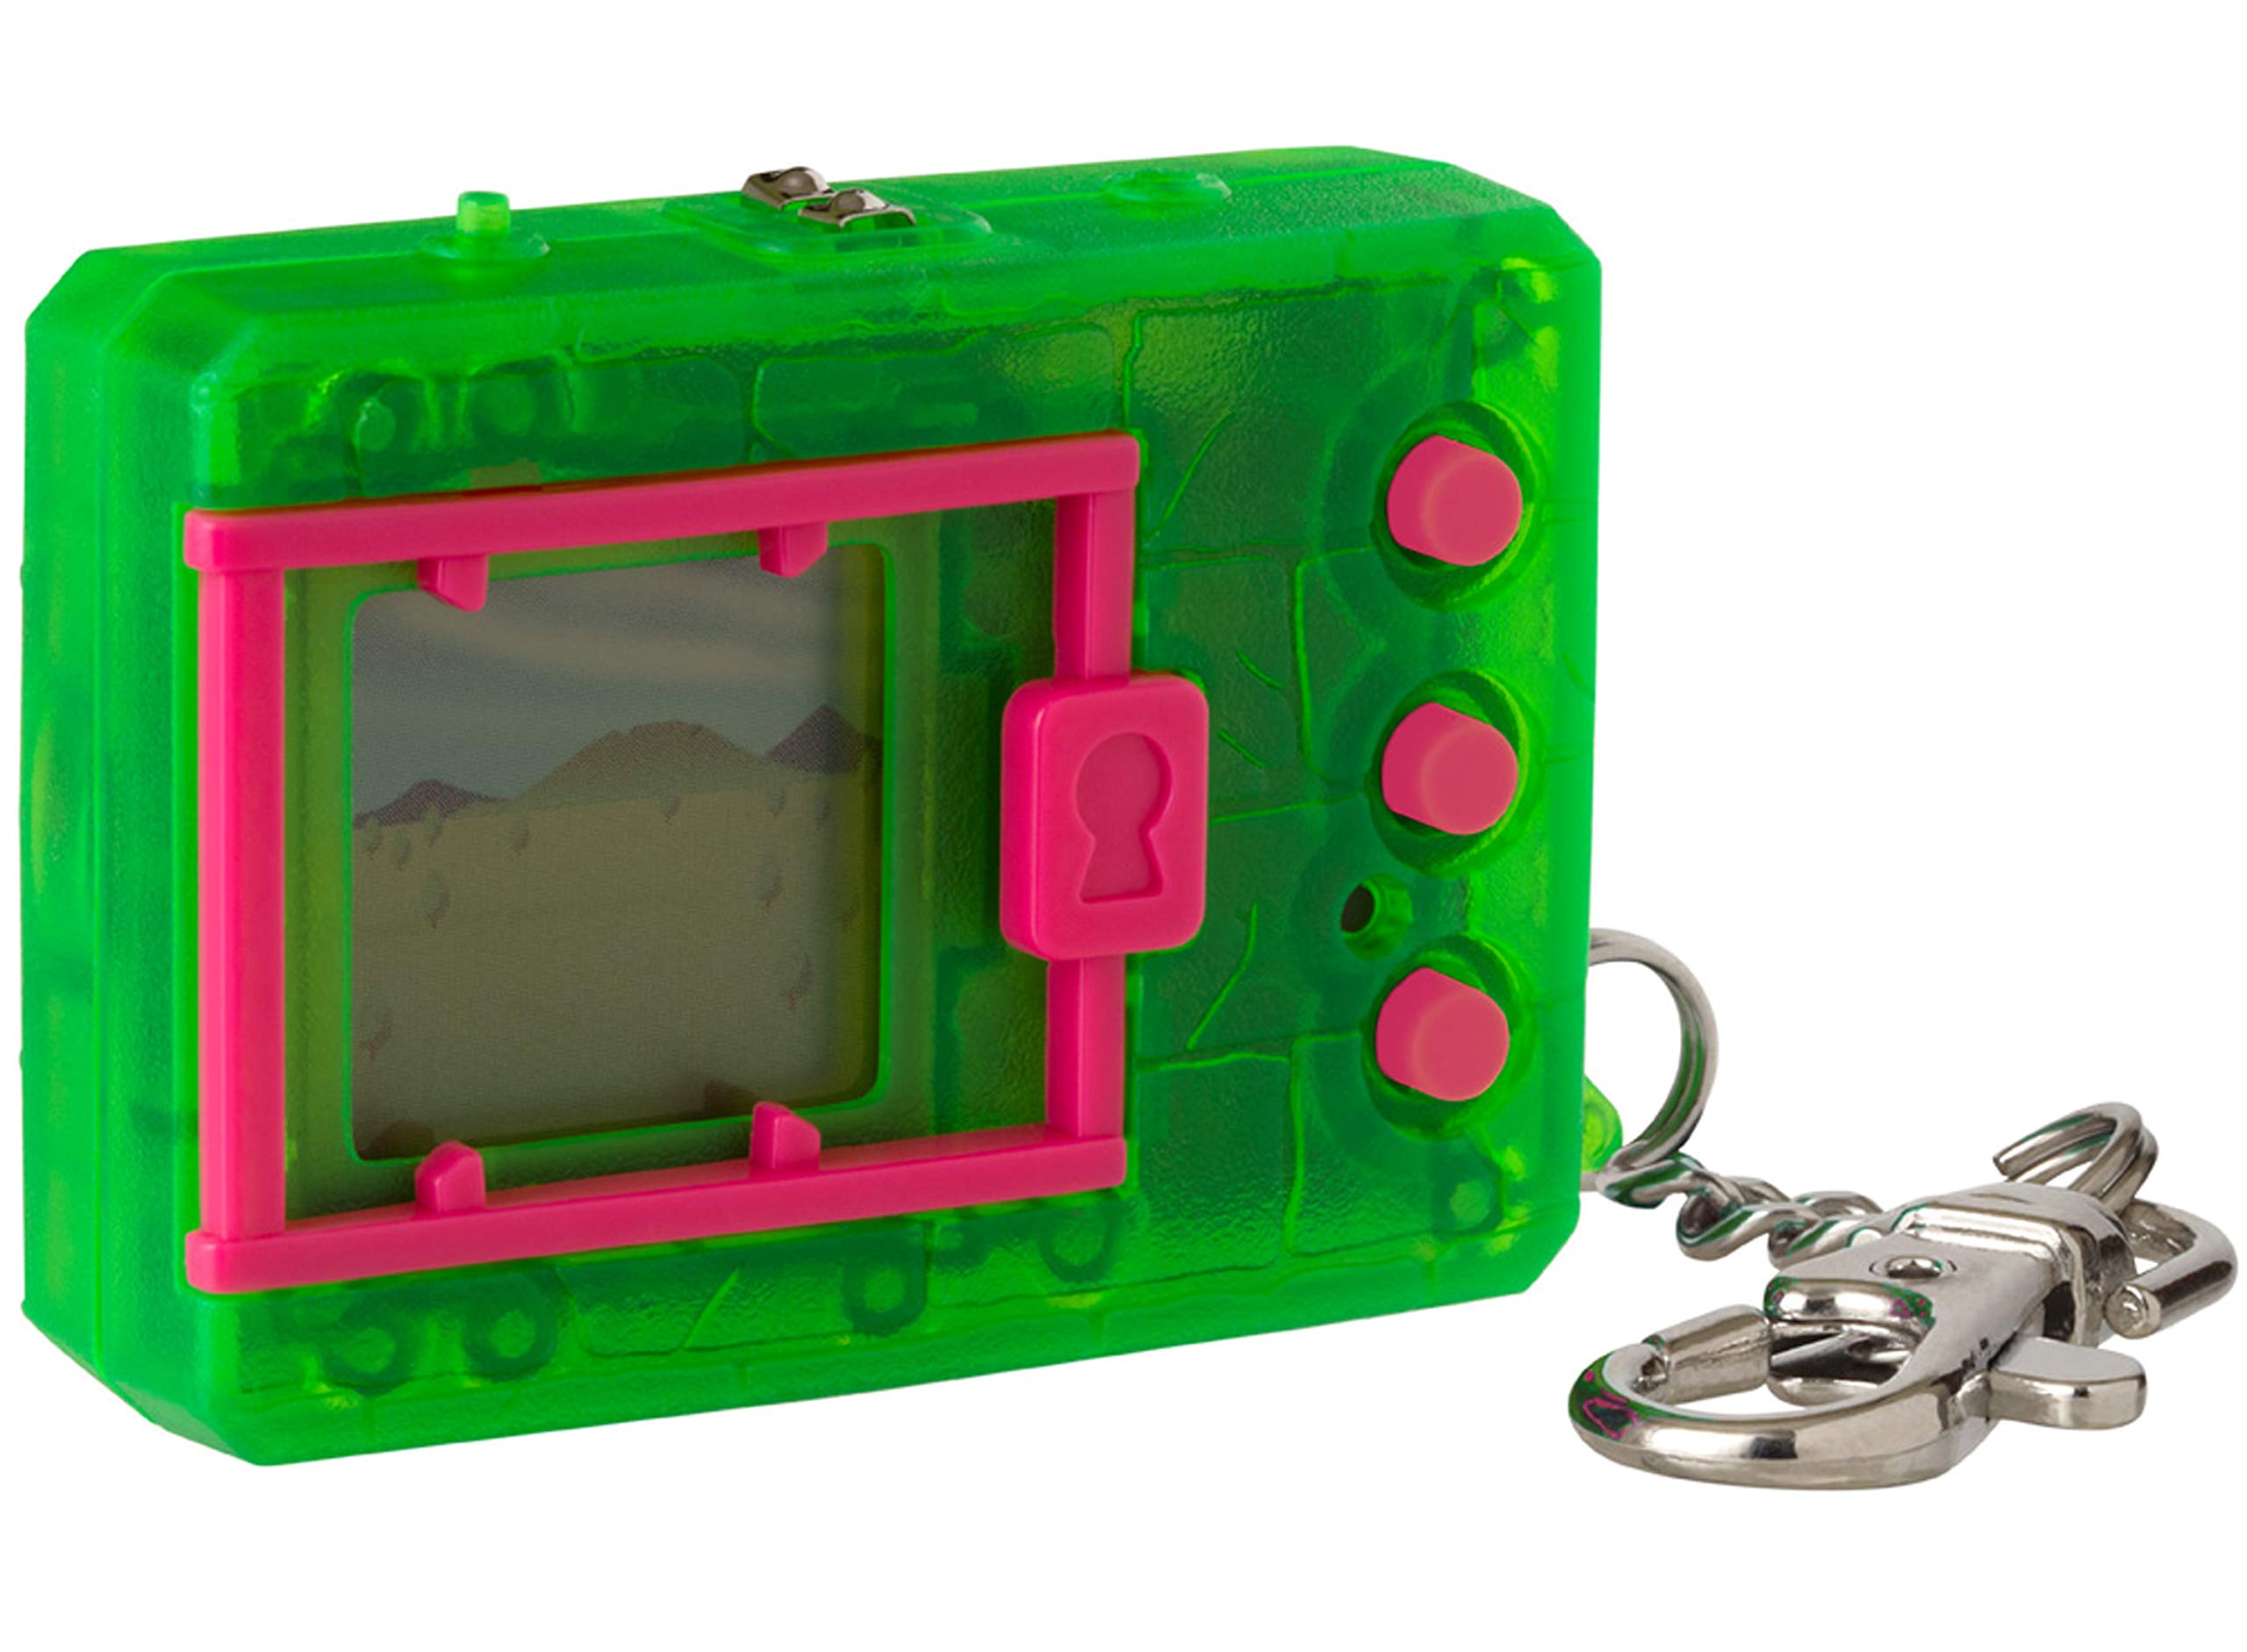 Digimon Bandai Original Digivice Virtual Pet Monster (Neon Green) $6.36 + Free Shipping w/ Prime or on orders over $35